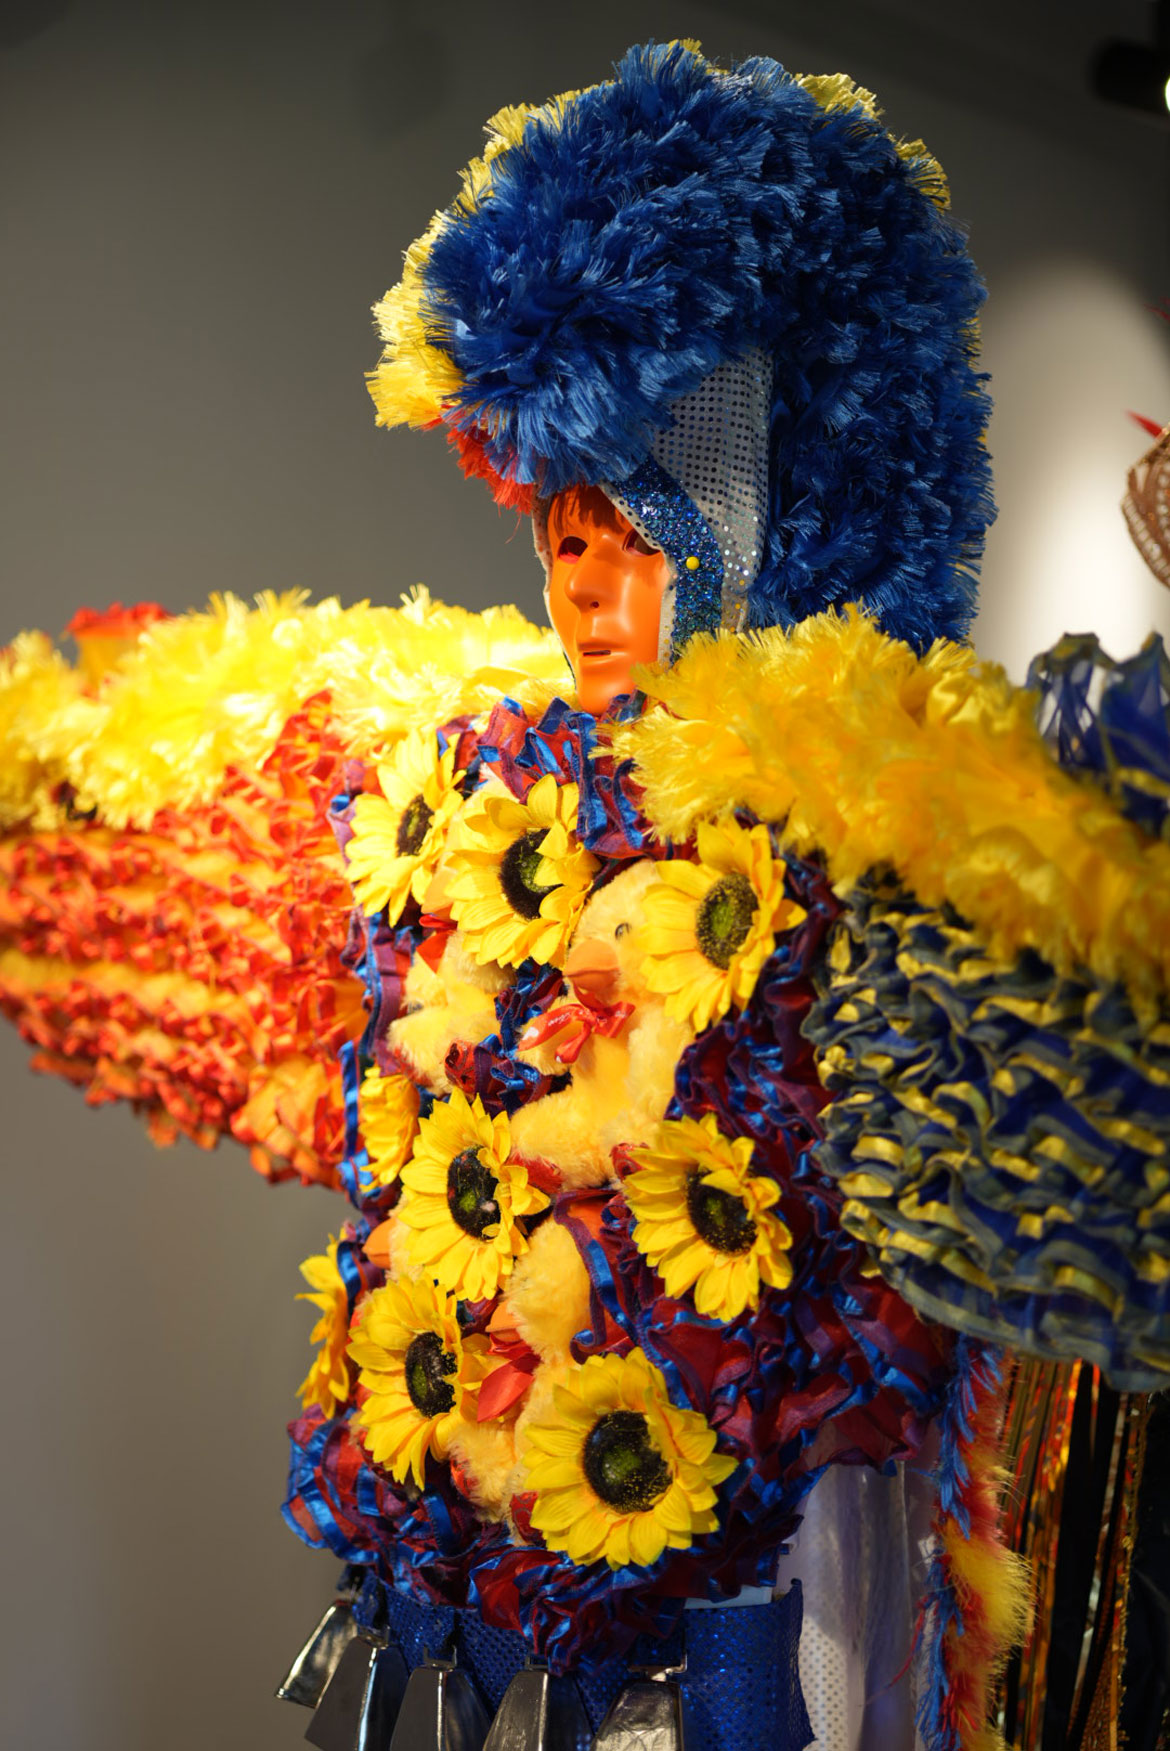 Asociacion Carnavalesca de Massachusetts mask and suit in “El Carnaval Continúa" at the Essex Art Center, Lawrence. (Mariana Martins photo)